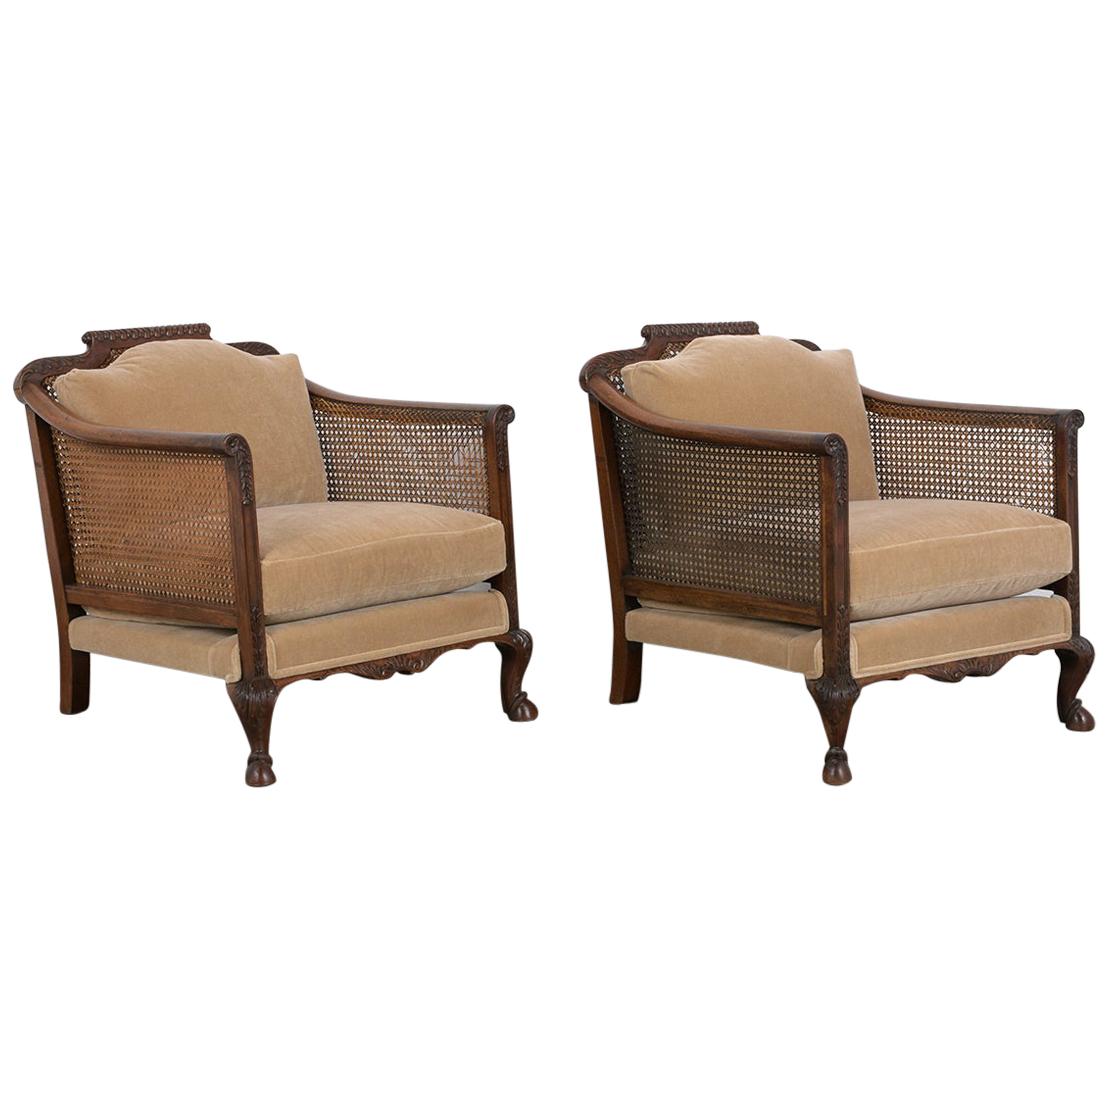 Pair of French 19th Century Louis XIV Style Armchairs